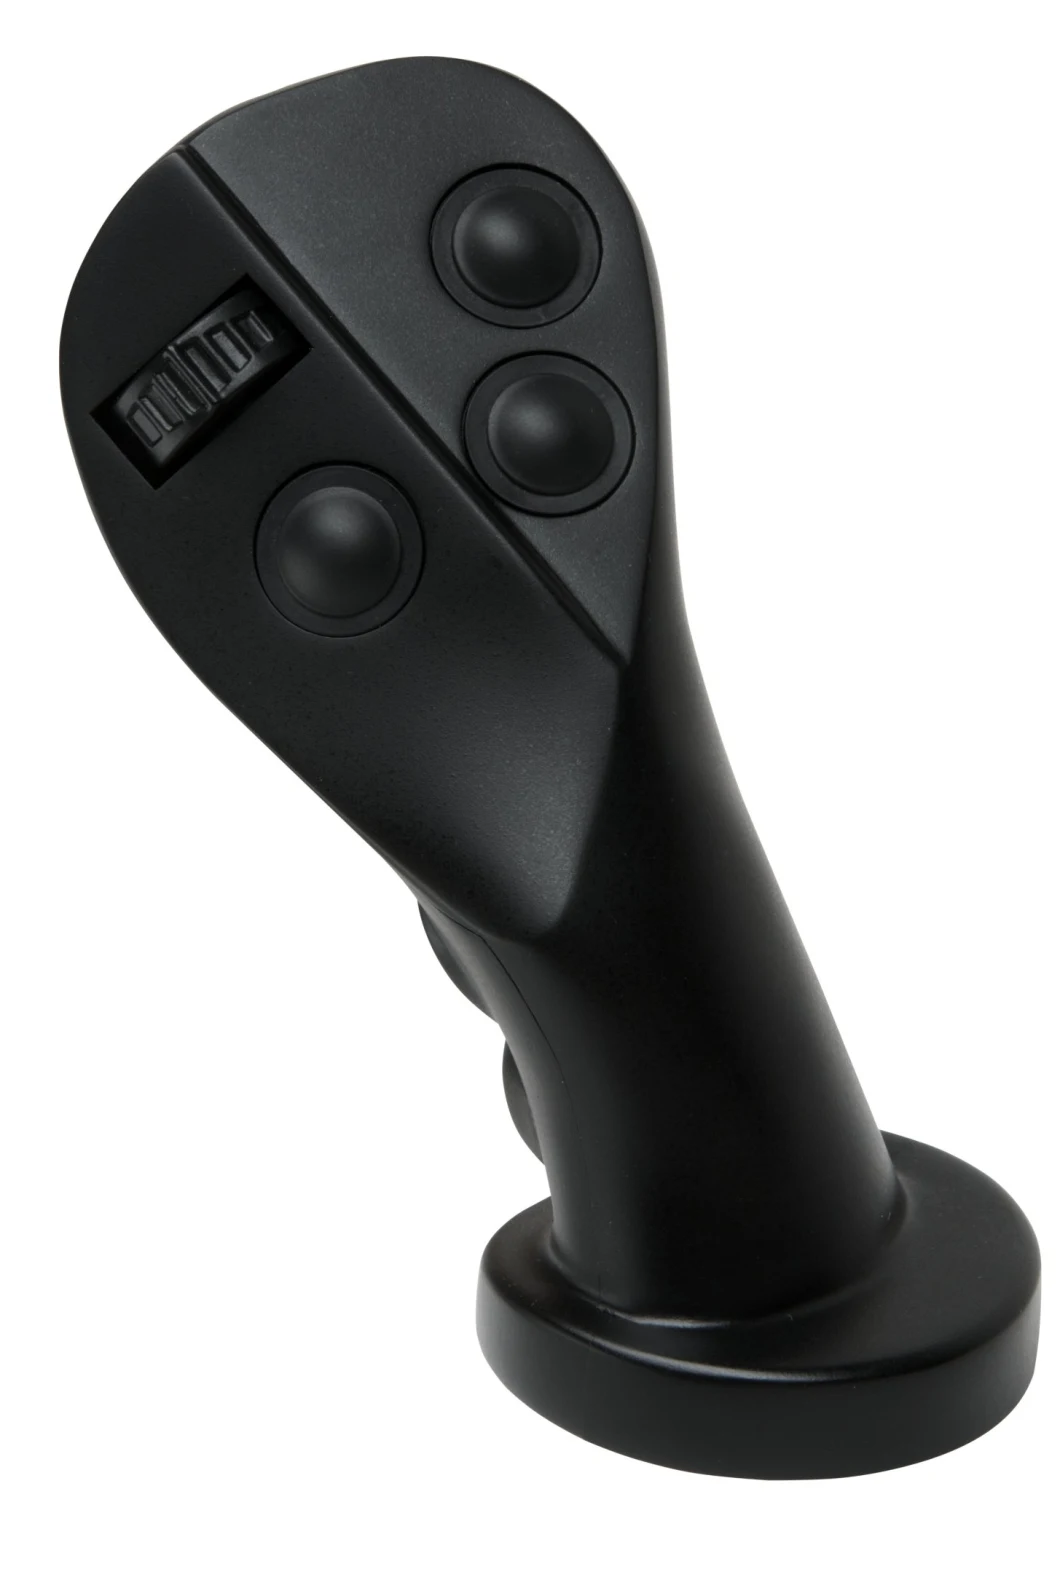 High Quality Single Speed Industrial Joystick Controls for Sale